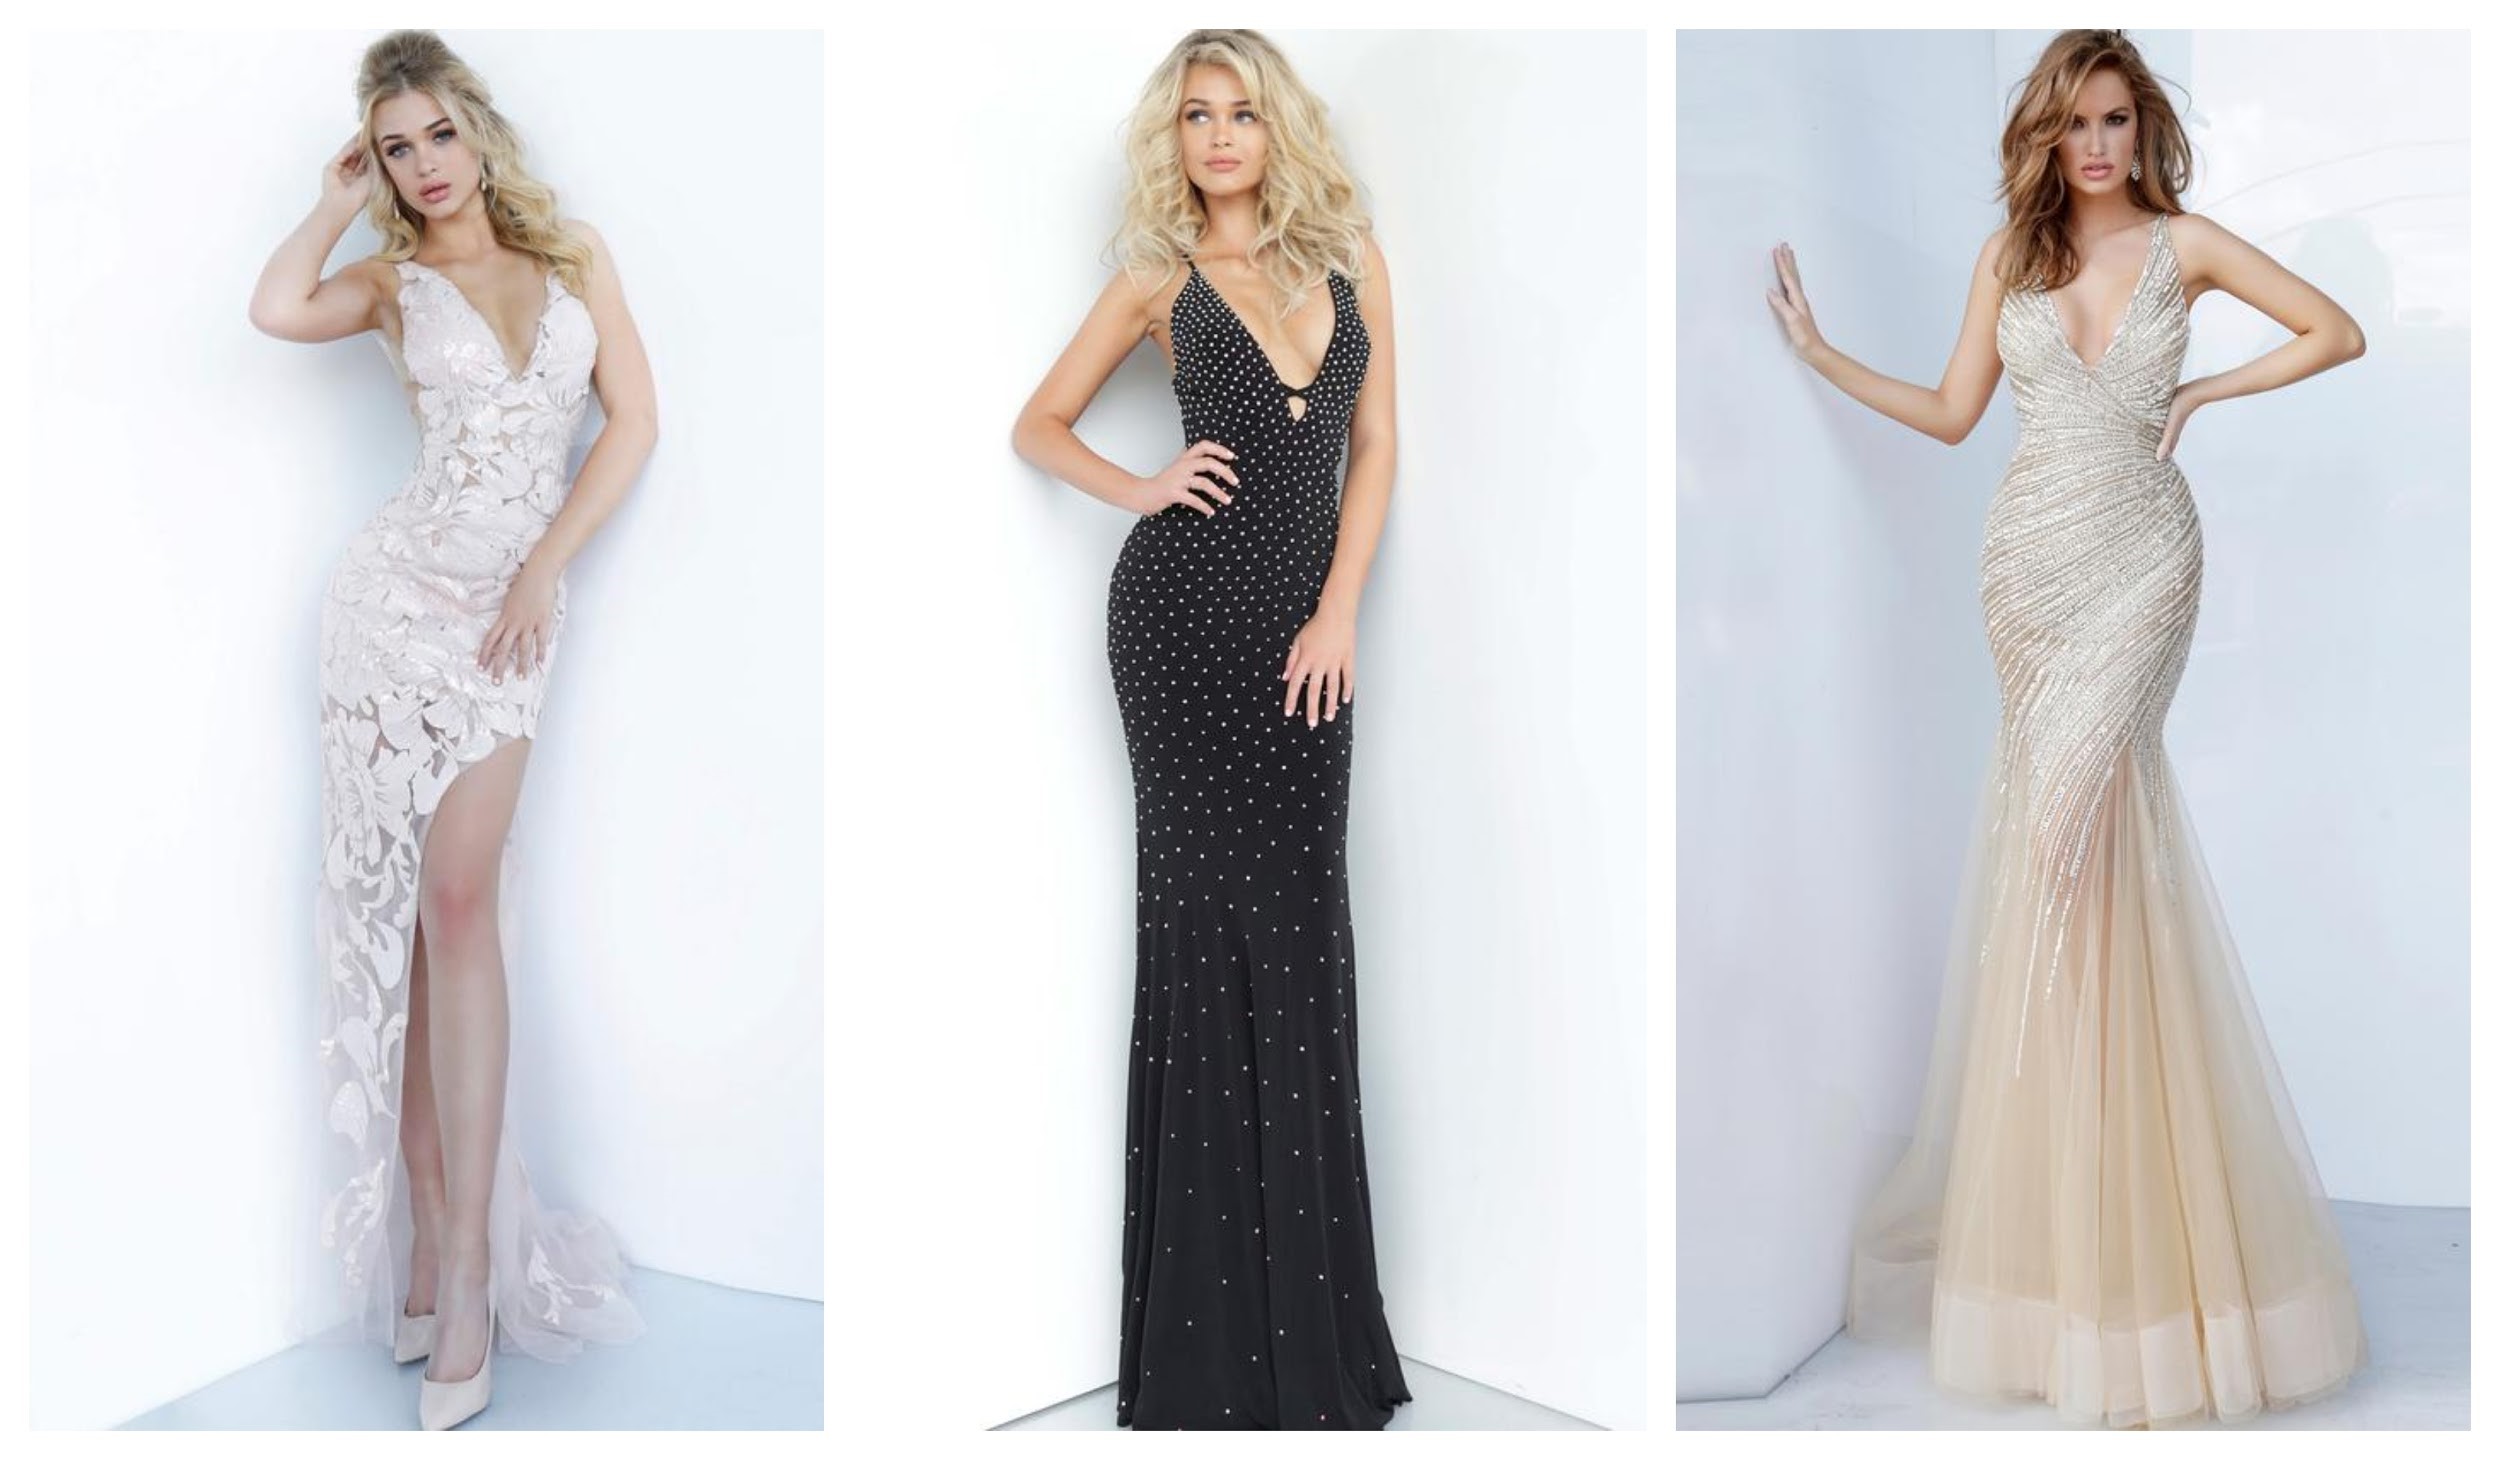 Jovani Dresses 2020 – New Trends and Styles Unveiled